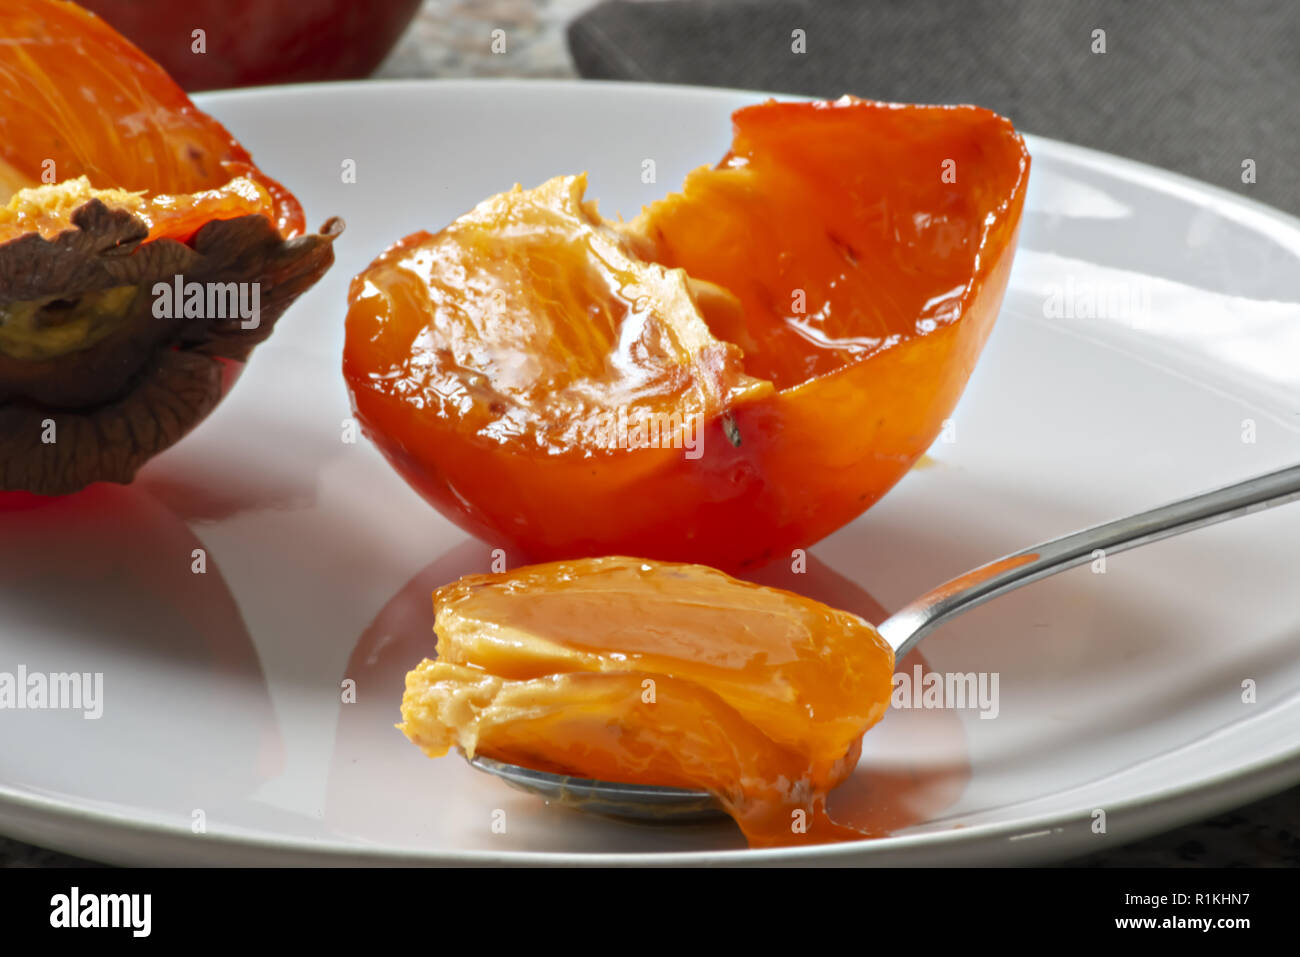 khaki fruit in the plate cut in half and full teaspoon close-up Stock Photo